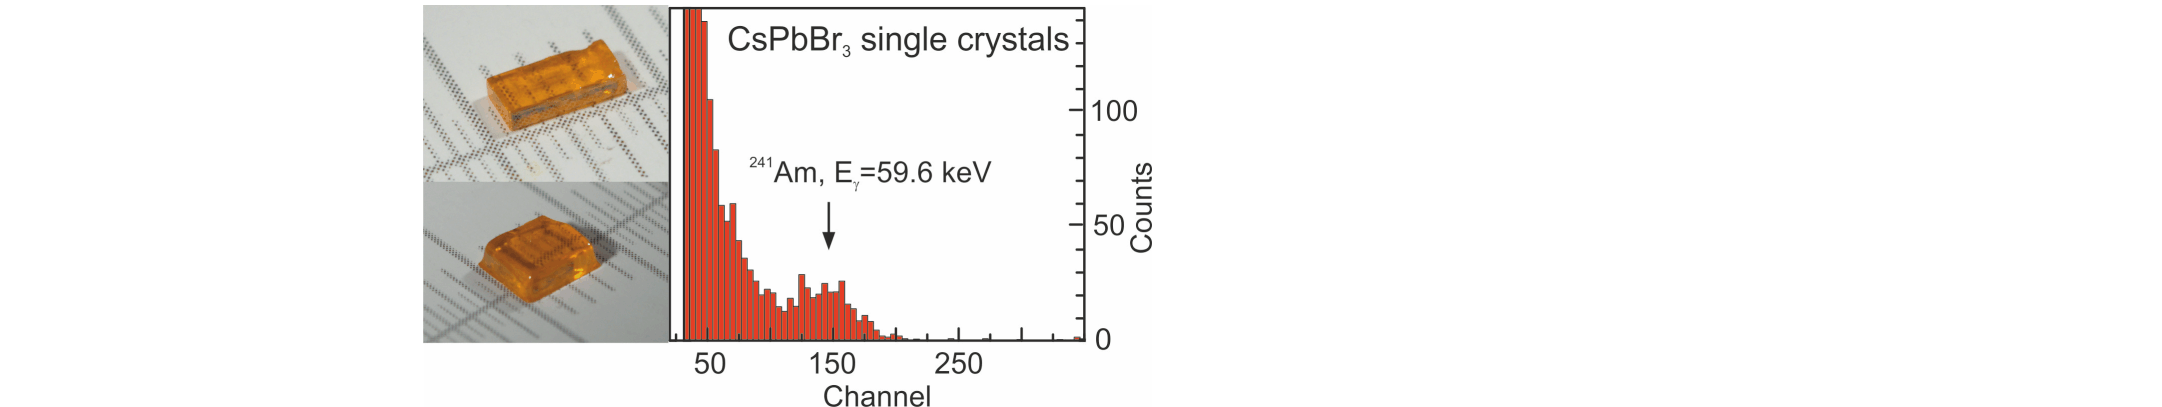 Solution-grown CsPbBr3 perovskite single crystals for photon detection